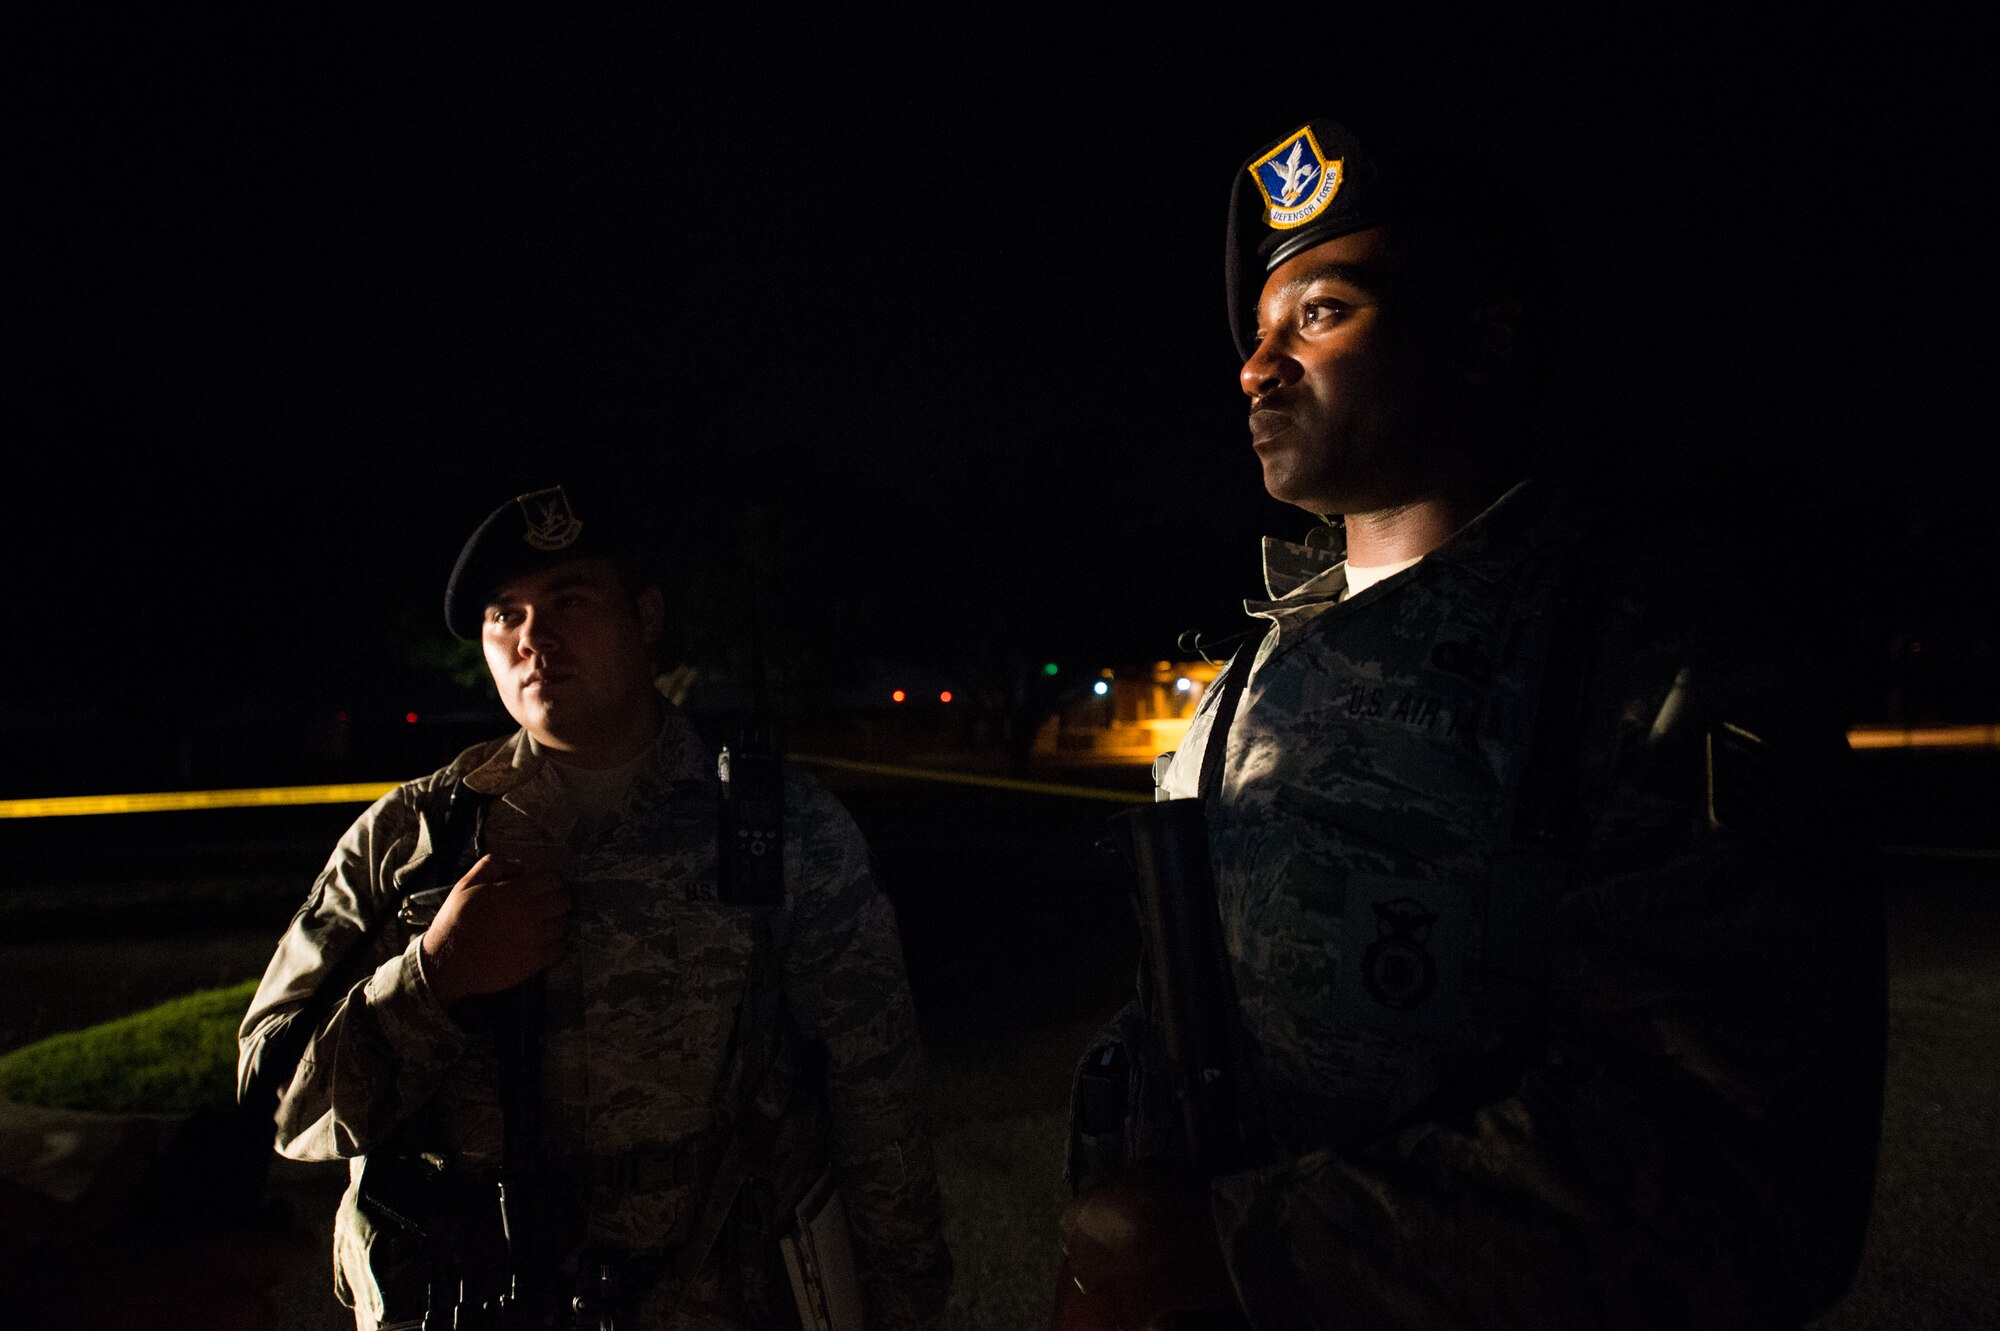 U.S. Air Force Tech. Sgt. Jason Williams, right, and Staff Sgt. Alan Glaze, 116th Security Forces Squadron, Georgia Air National Guard, respond to a simulated crime scene during a training exercise at Joint Base Savannah, Ga., June 24, 2015. The JSTARS cops from the Georgia Air National Guard’s 116th Air Control Wing completed 15 days of law enforcement and flightline security training during their annual tour at Joint Base Savannah. During the training, the security forces Airmen responded to multiple simulated security threats each day and played the role of both cops and aggressors under the watchful eye of evaluators from the unit. (U.S. Air National Guard photo by Senior Master Sgt. Roger Parsons/Released)